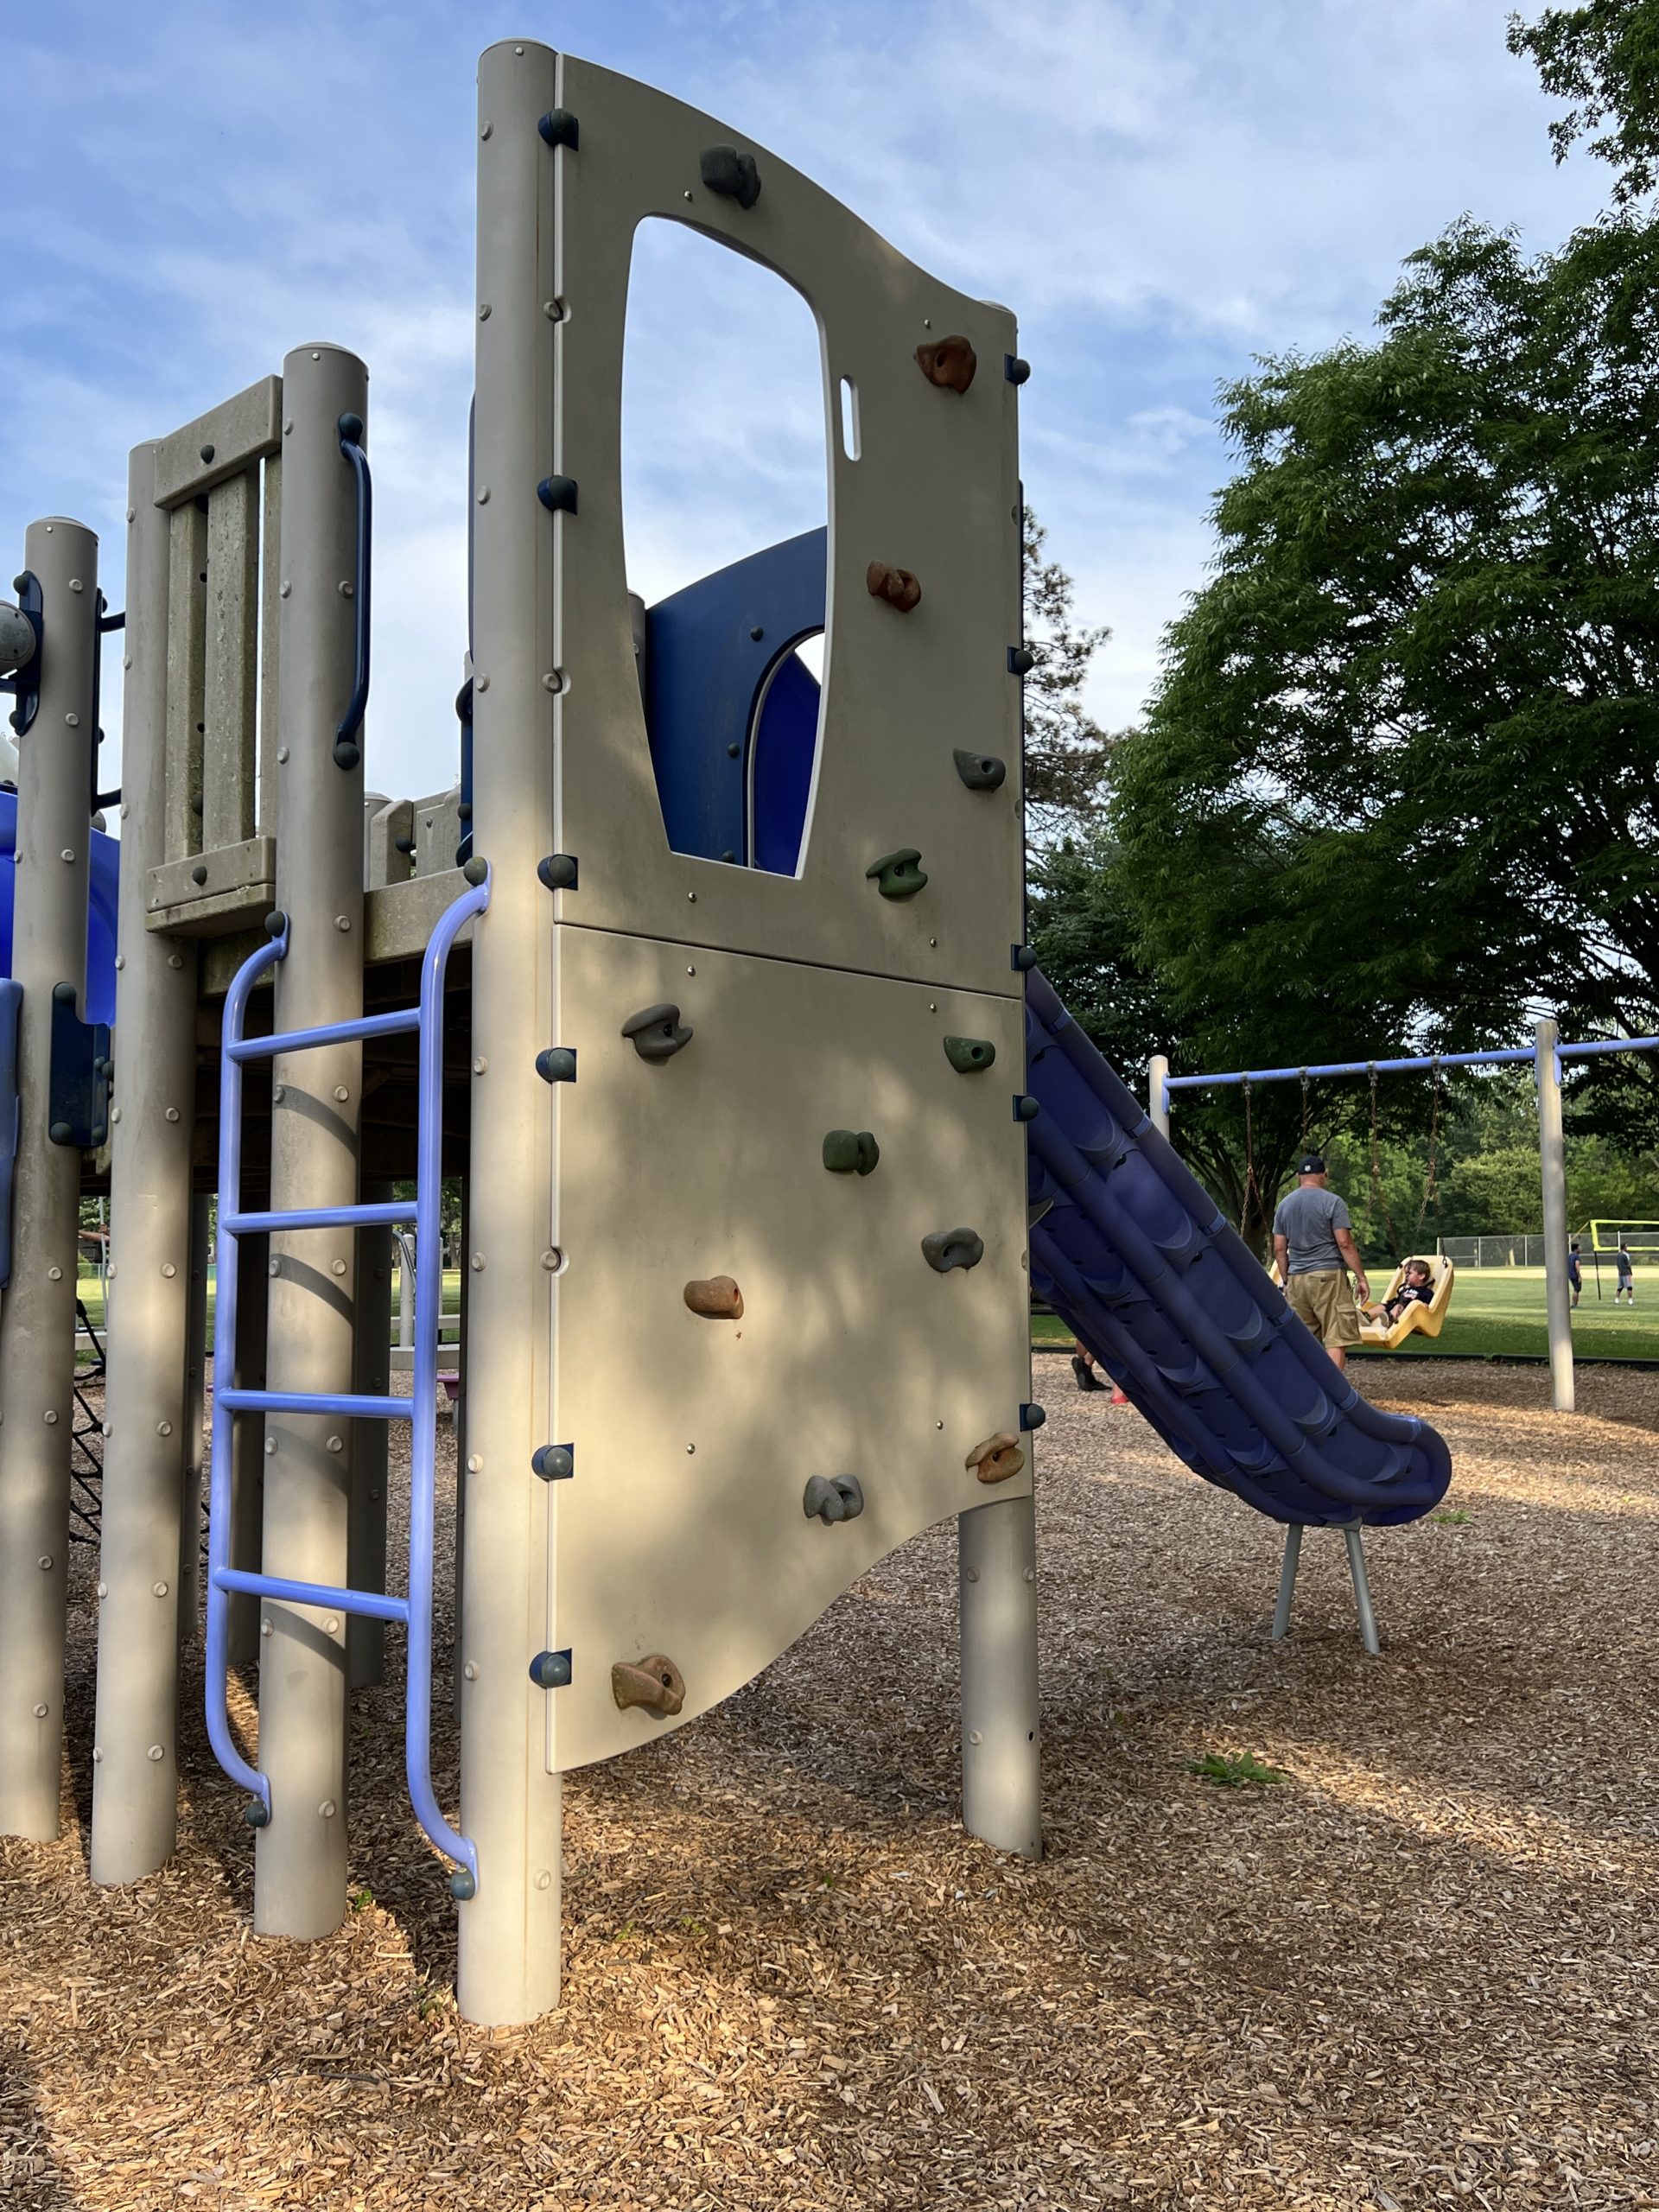 North Branch Park Playground in Bridgewater NJ - Features - Rock climbing wall with ladder